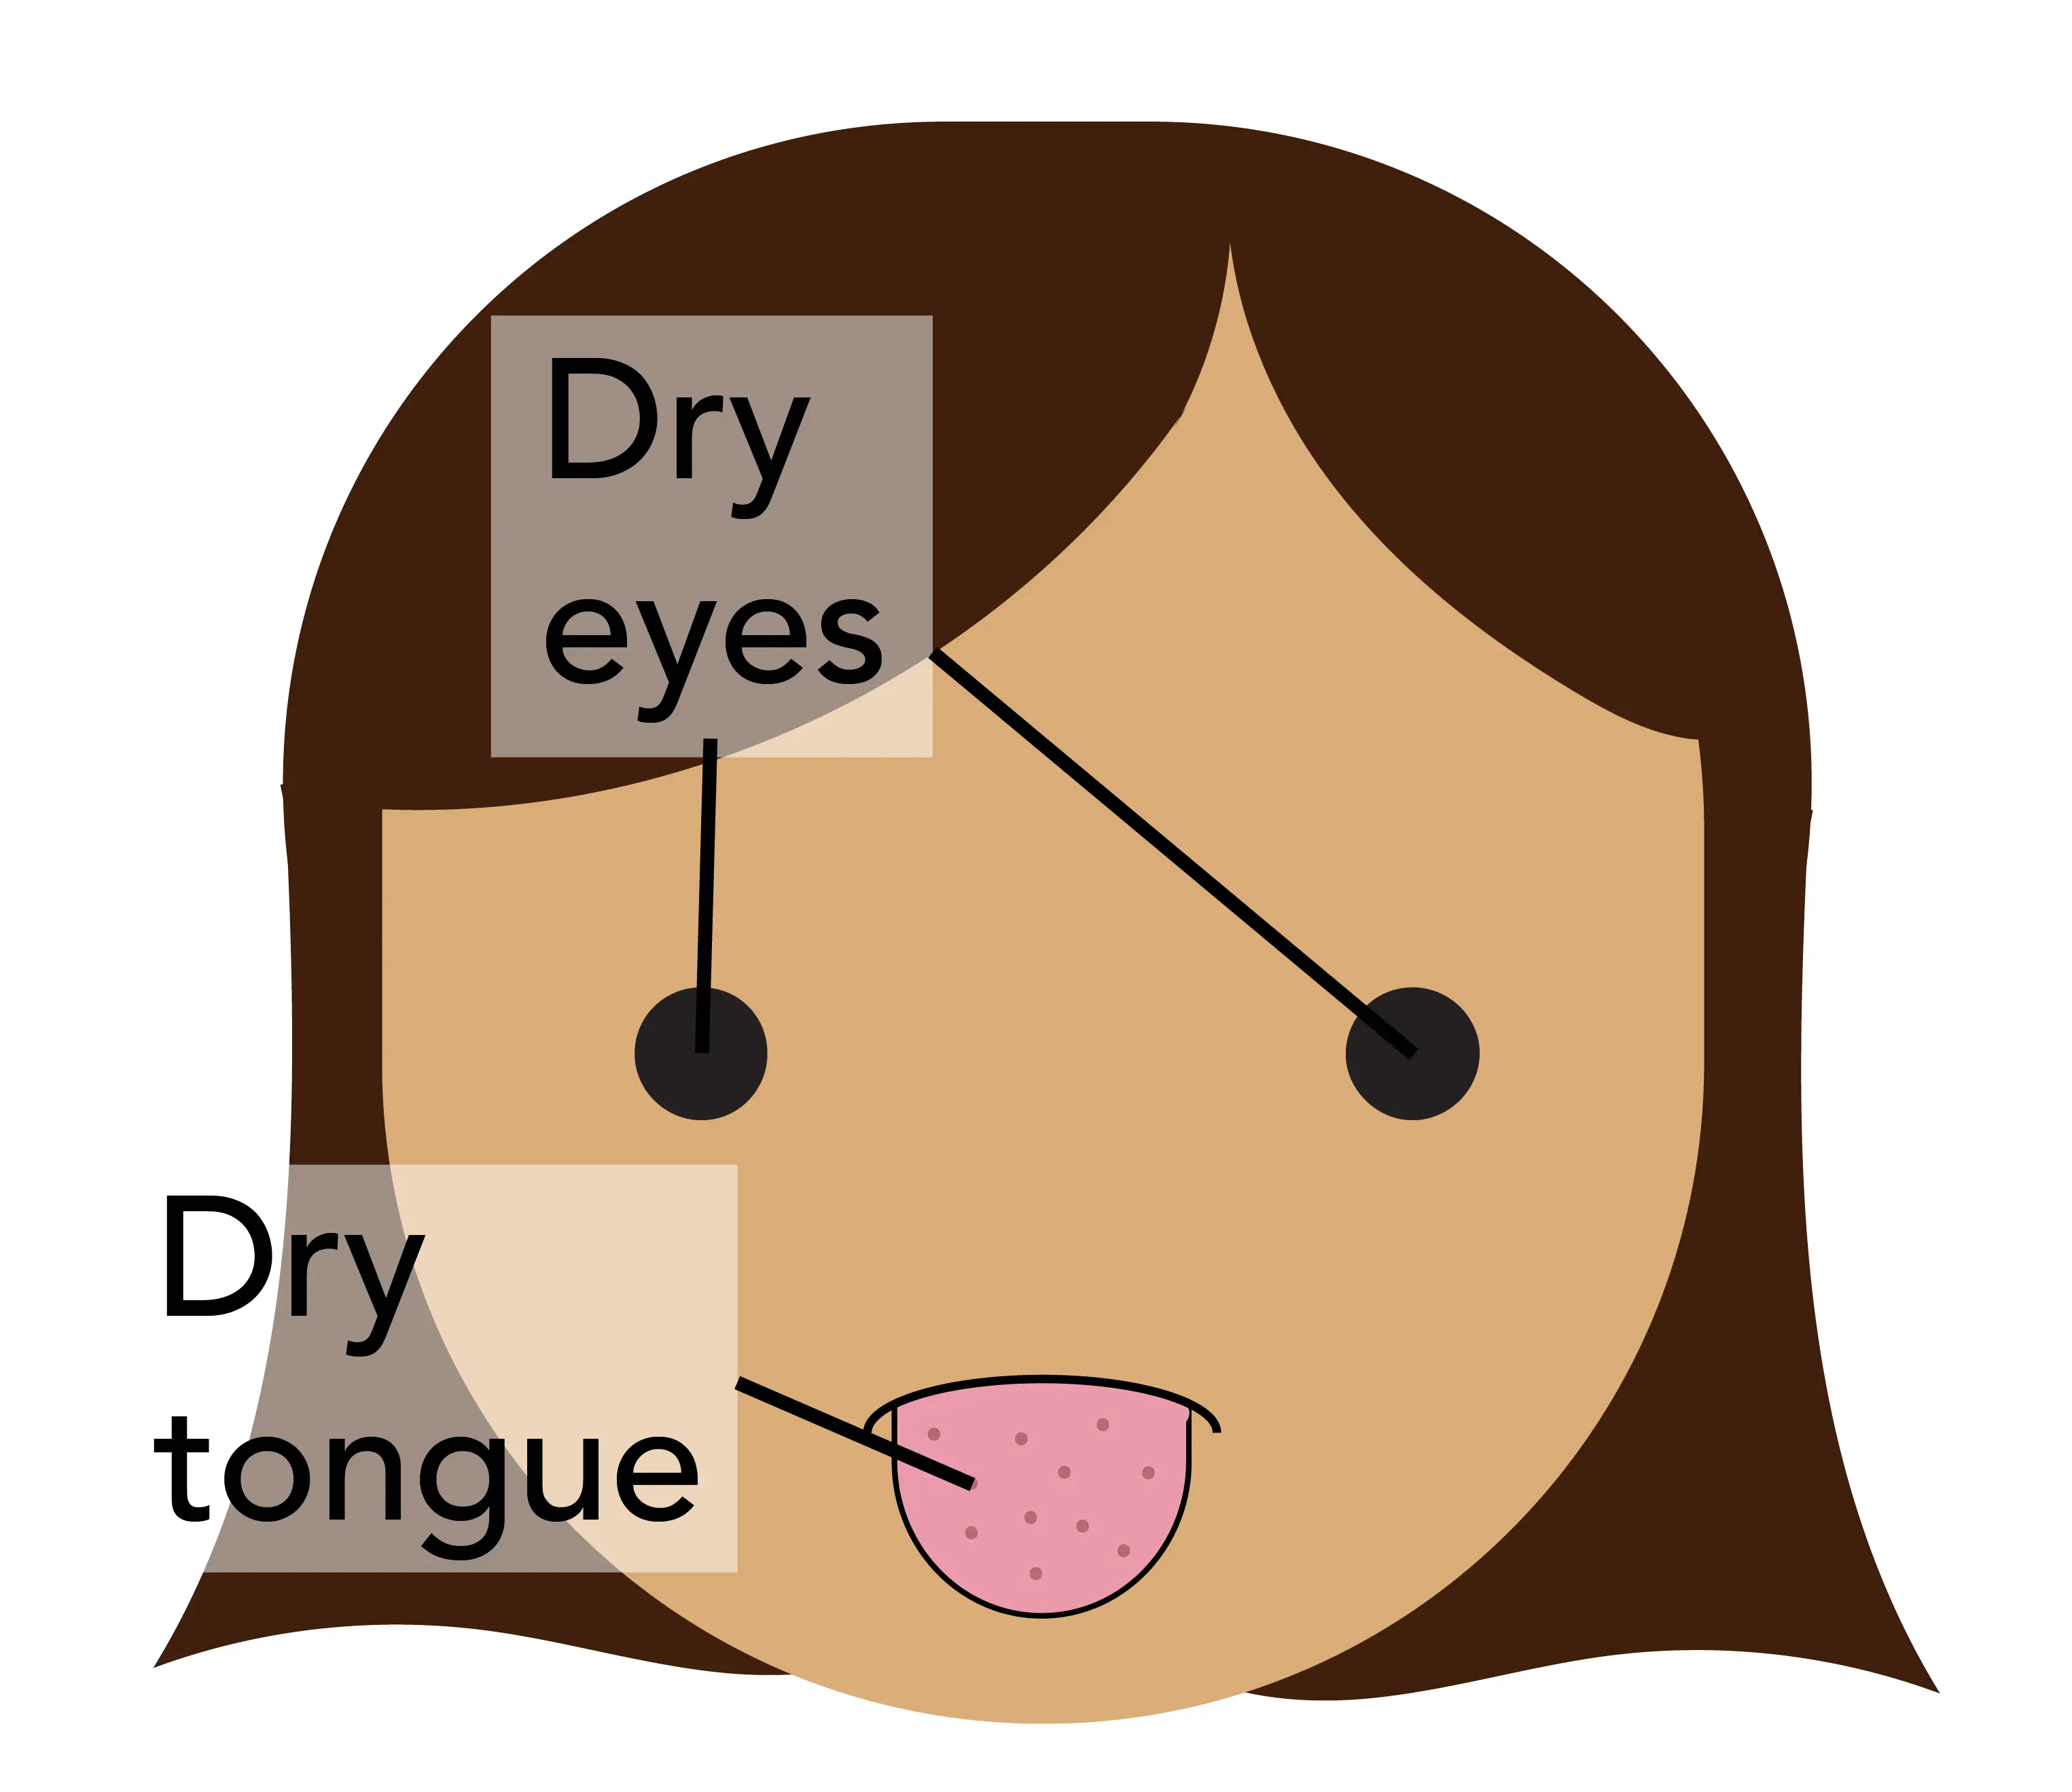 Dry eyes and tongue are typical symptoms of Sjögren's syndrome.